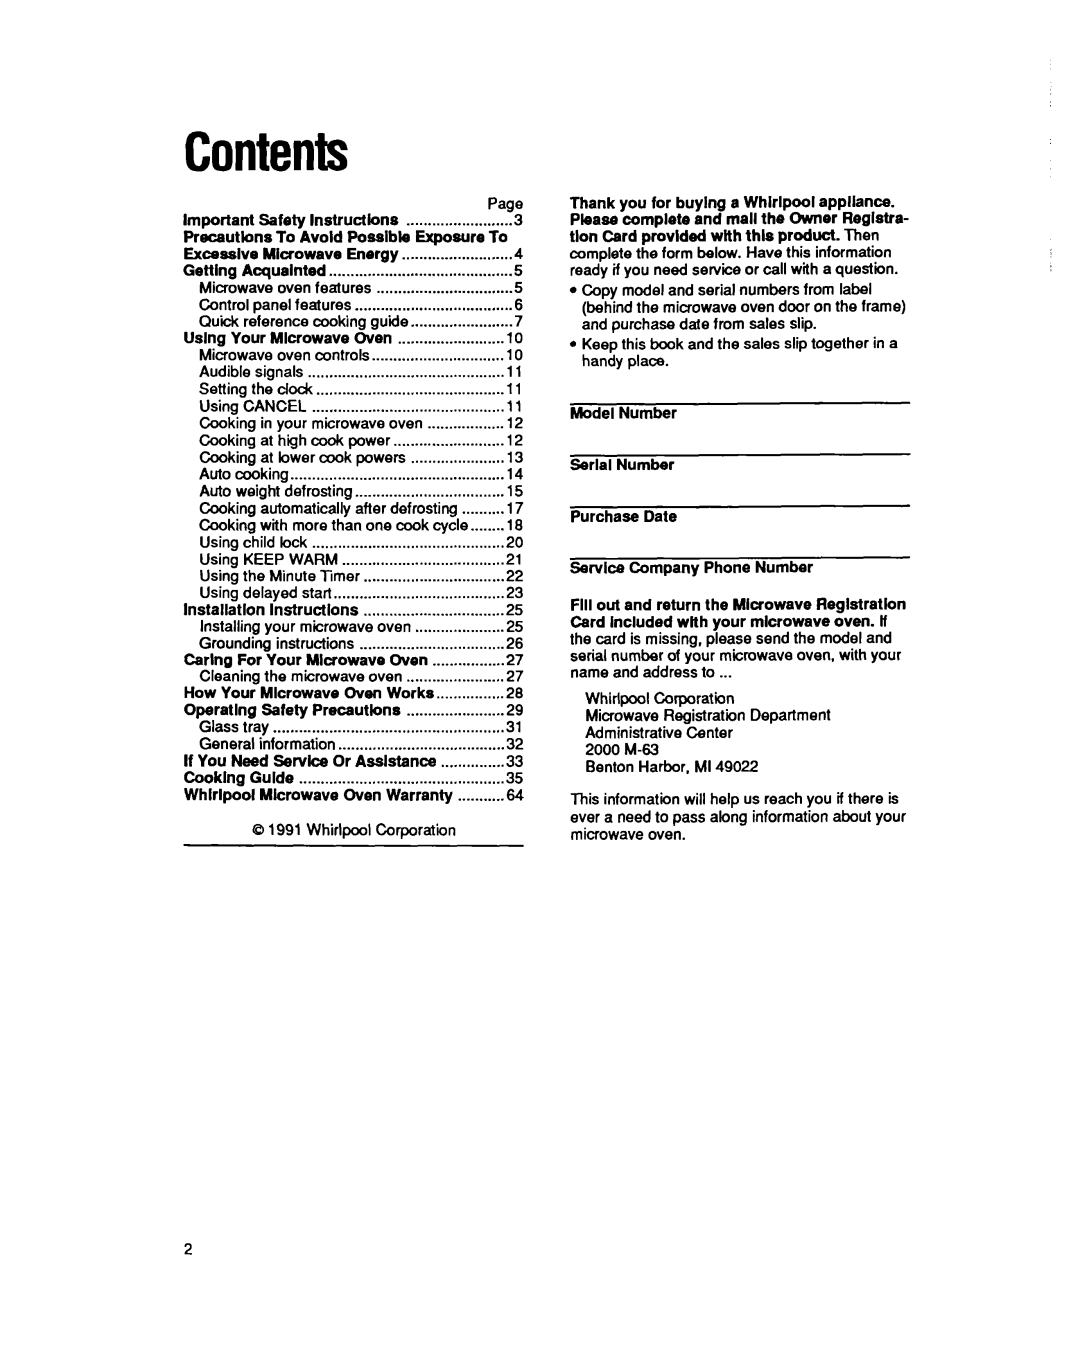 Whirlpool MS3080XY user manual Contents 